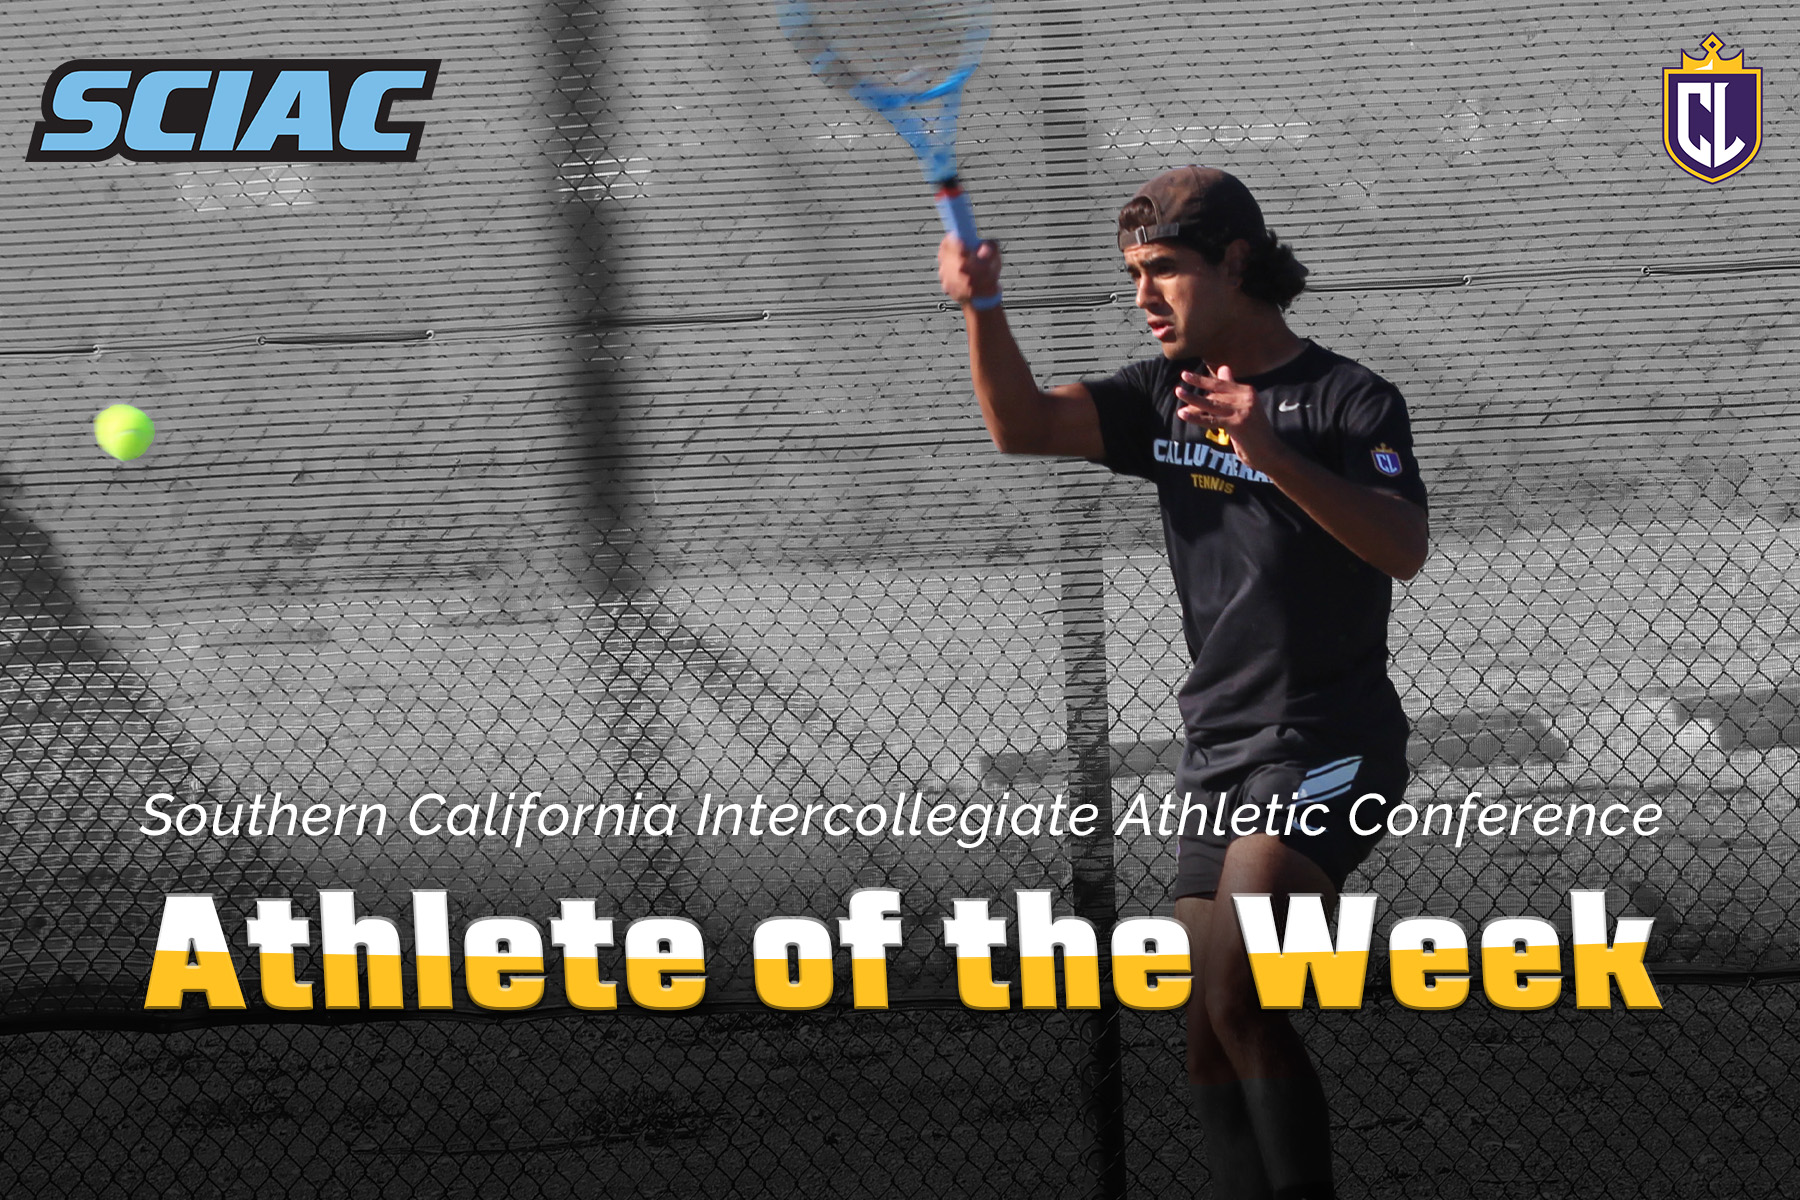 Spina Earns SCIAC Men’s Tennis Athlete of the Week